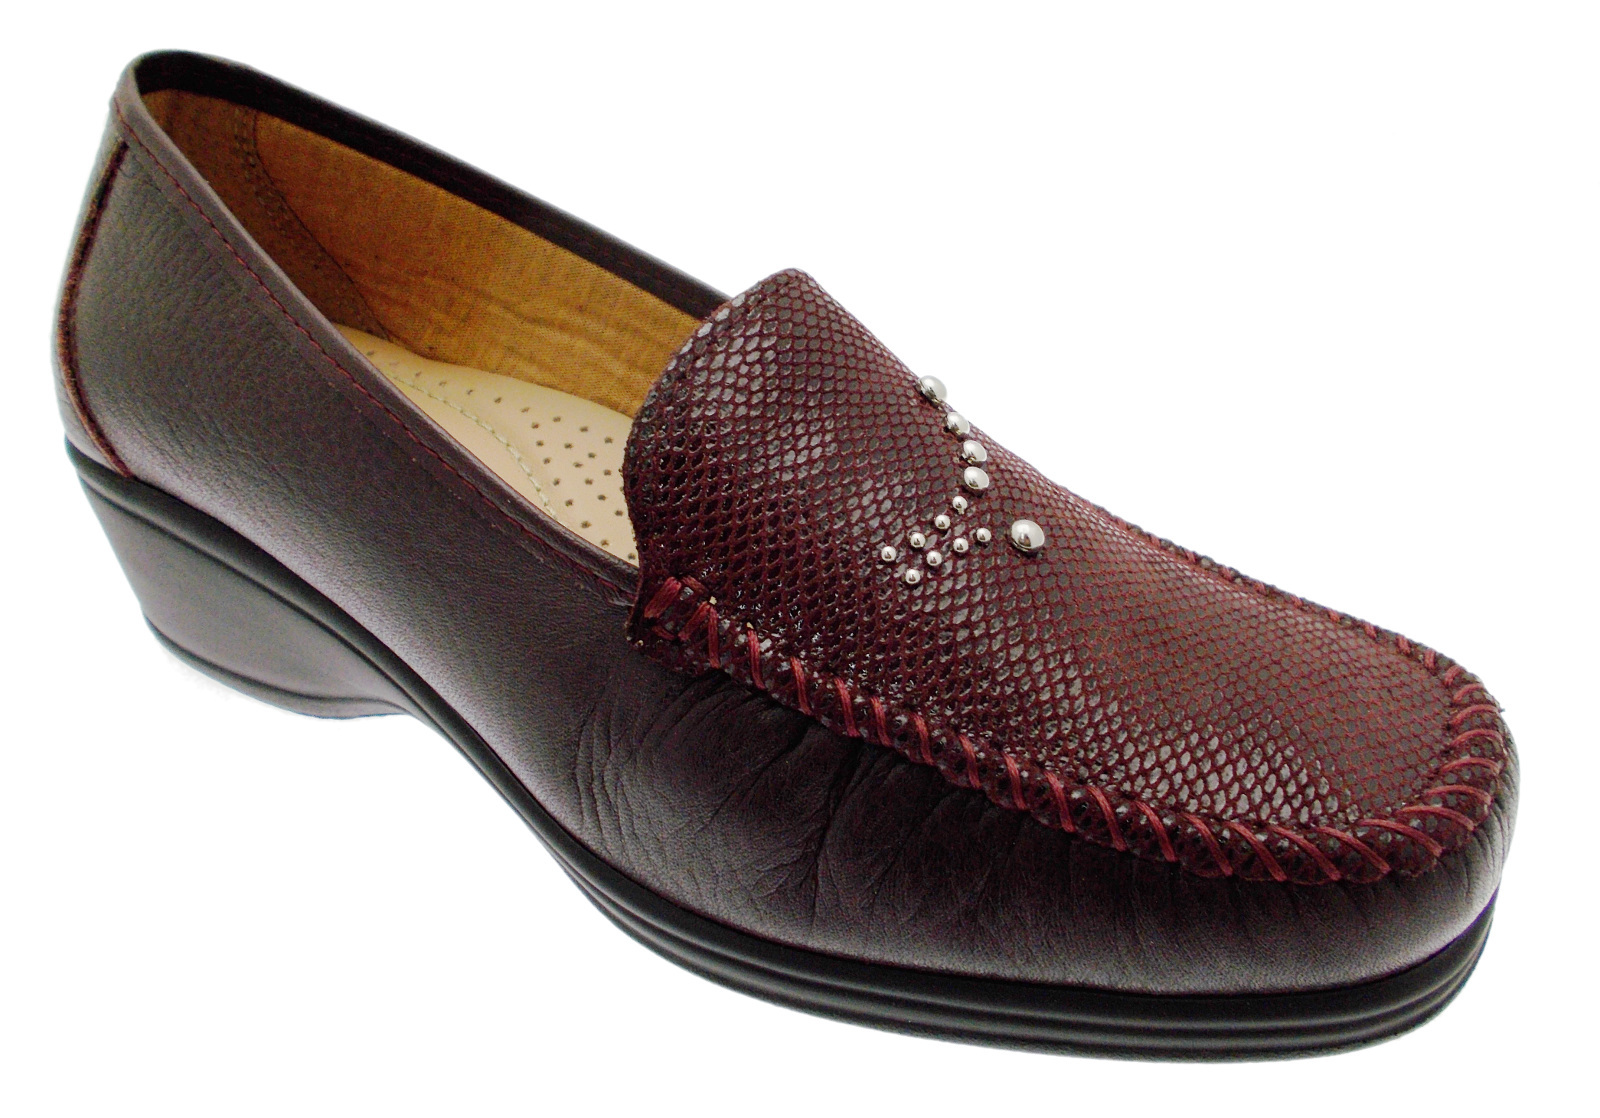 Loafers: K3982 Bordeaux moccasin moccasin wedge